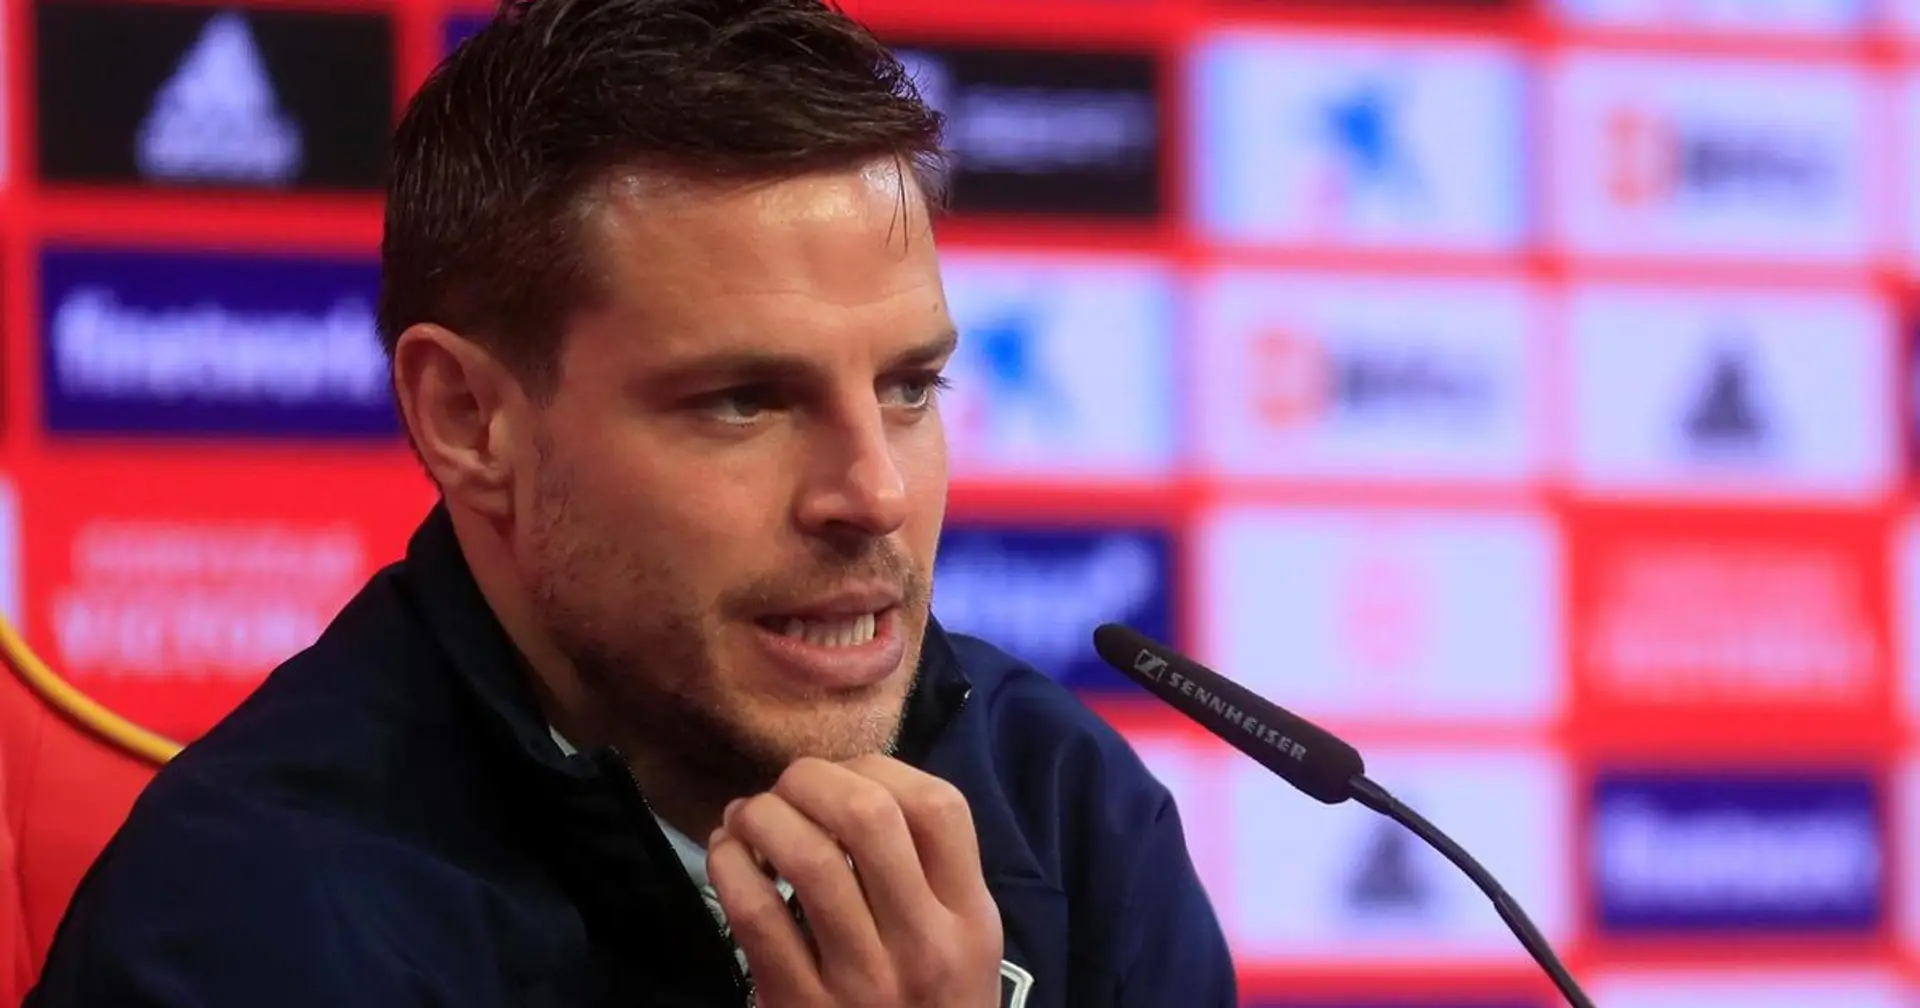 Cesar Azpilicueta outlines Spain's aims and names key factor they have been missing in Euros